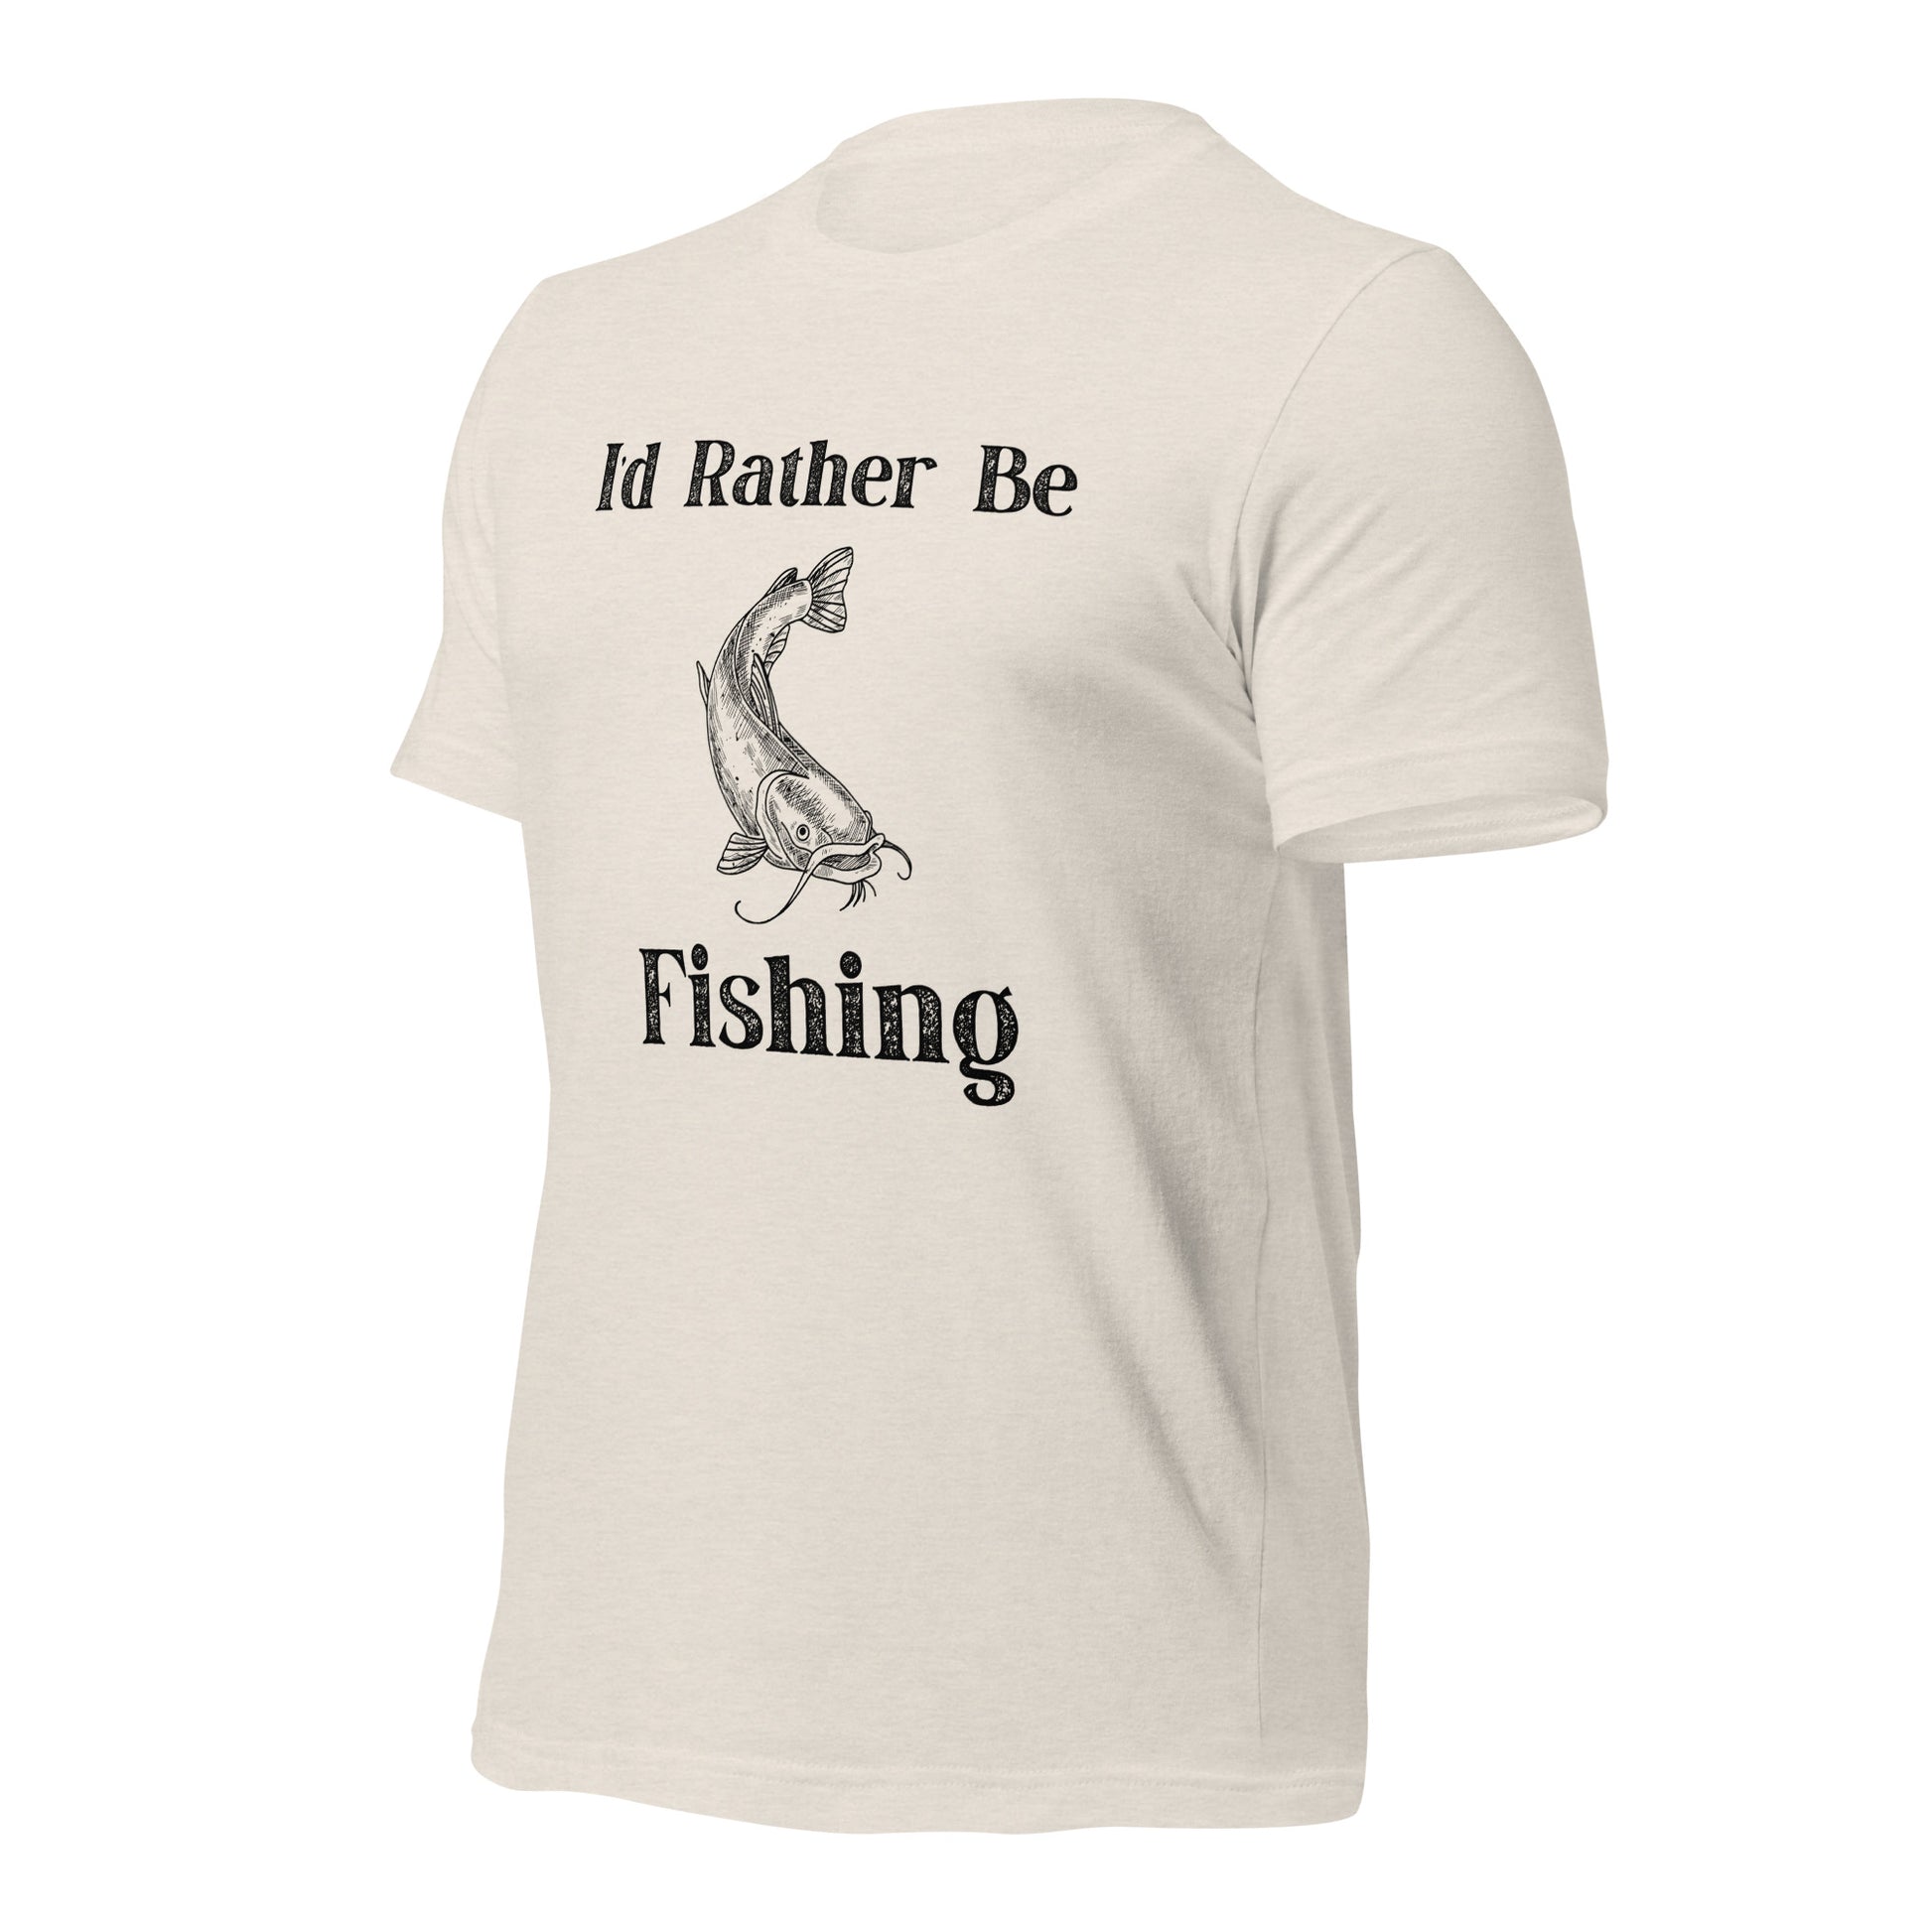 I'd Rather Be Fishing" T-Shirt | Unique Fishing Gift Ideas Dad – Got Gifts